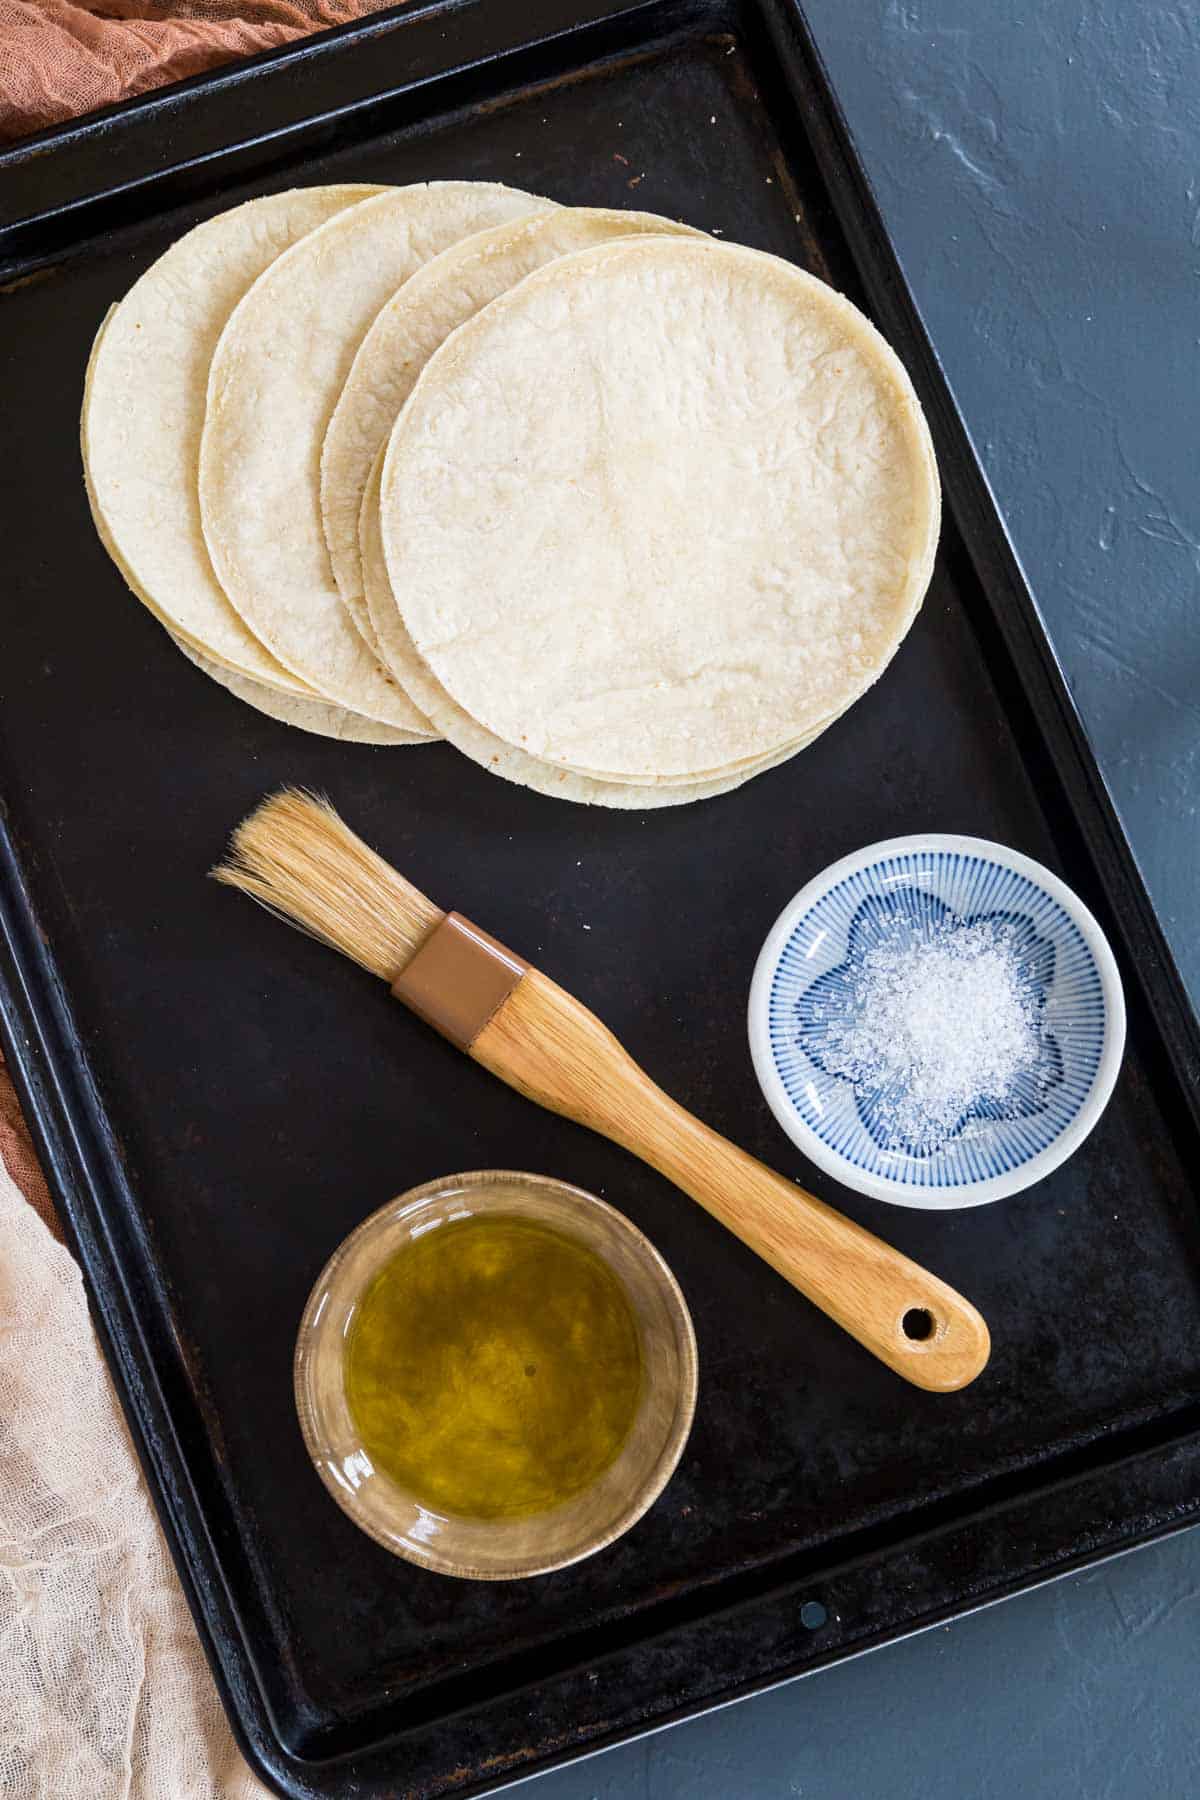 baking sheet with corn tortillas, olive oil, a pastry brush, and a small bowl of kosher salt